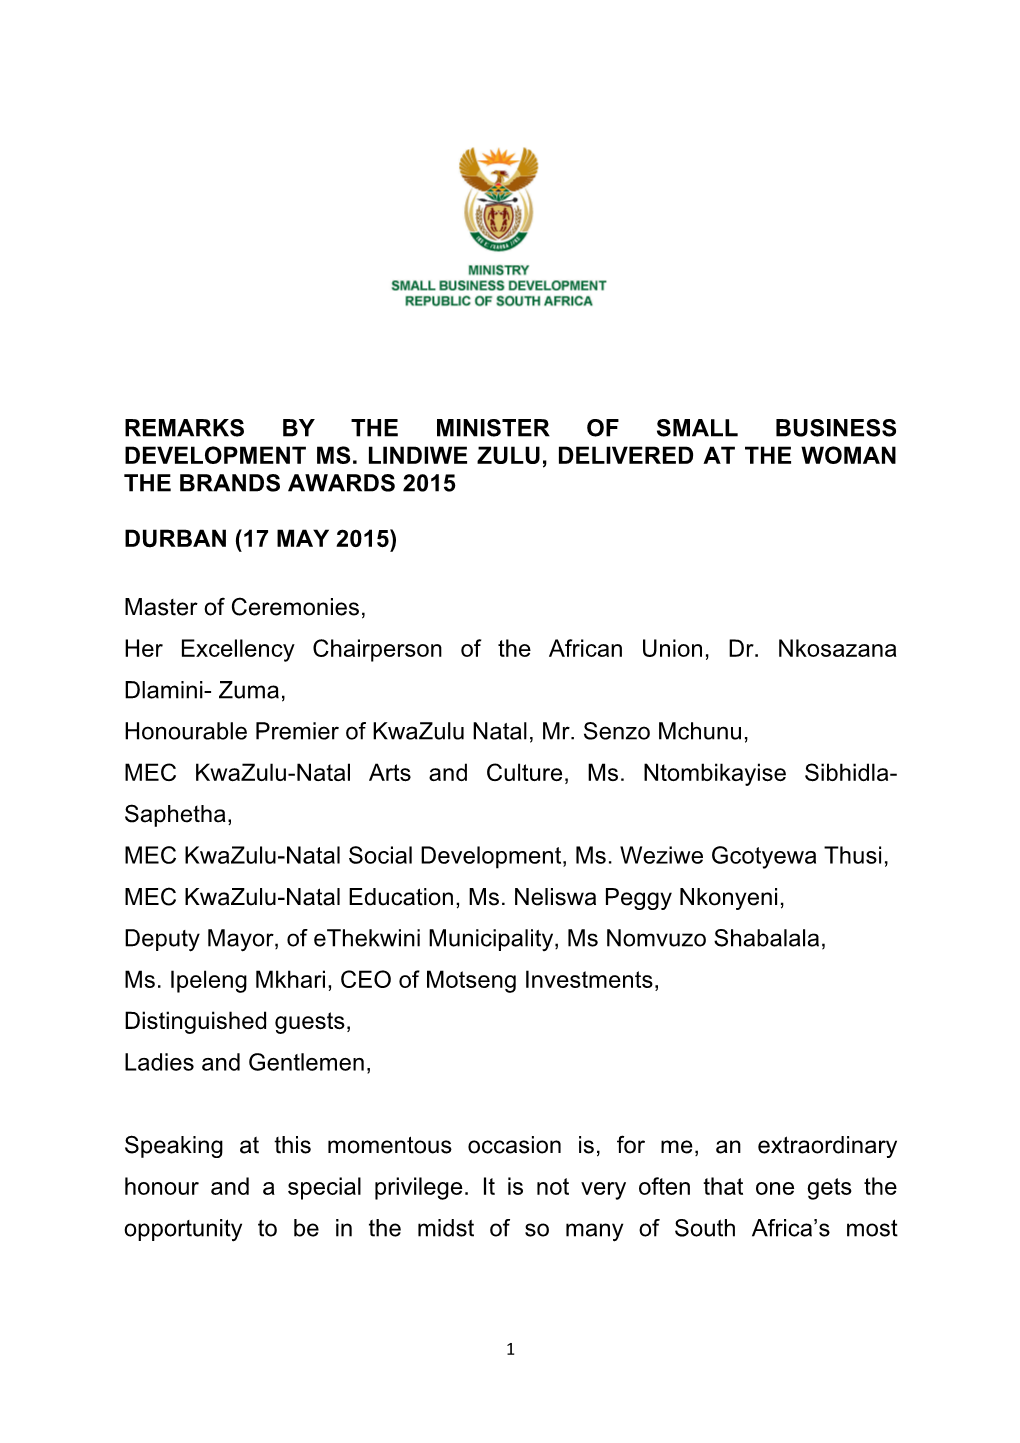 Remarks by the Minister of Small Business Development Ms